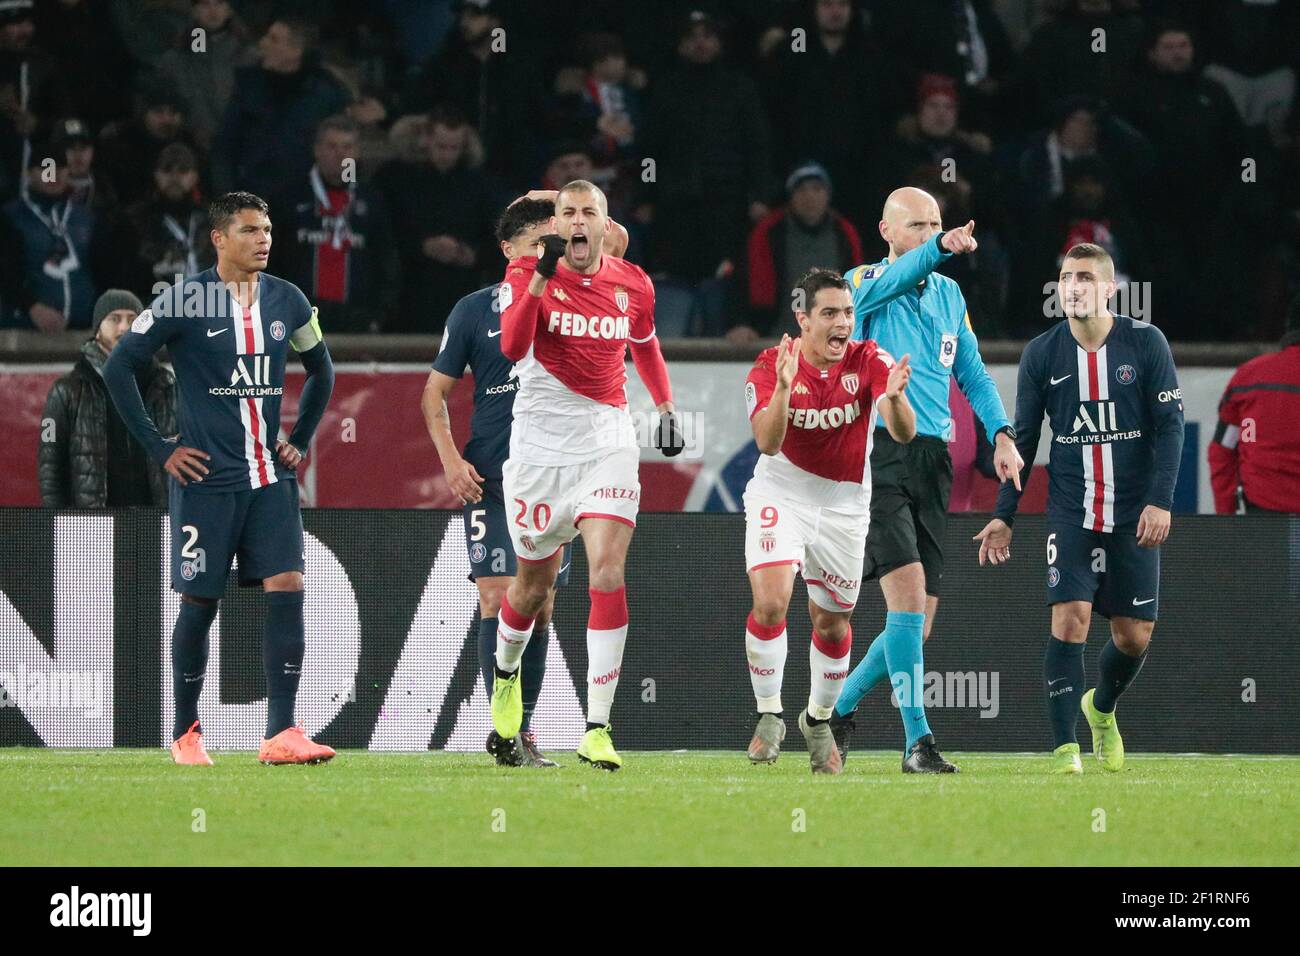 Islam SLIMING (AS Monaco) scored a goal after referee decision from video arbitrage, celebration, with Wissam BEN YEDDER (AS Monaco), Marcos Aoas Correa, Marquinhos (PSG), Thiago Silva (PSG), Marco Verratti (PSG) during the French championship L1 football match between Paris Saint-Germain and AS Monaco on January 12, 2020 at Parc des Princes stadium in Paris, France - Photo Stephane Allaman / DPPI Stock Photo